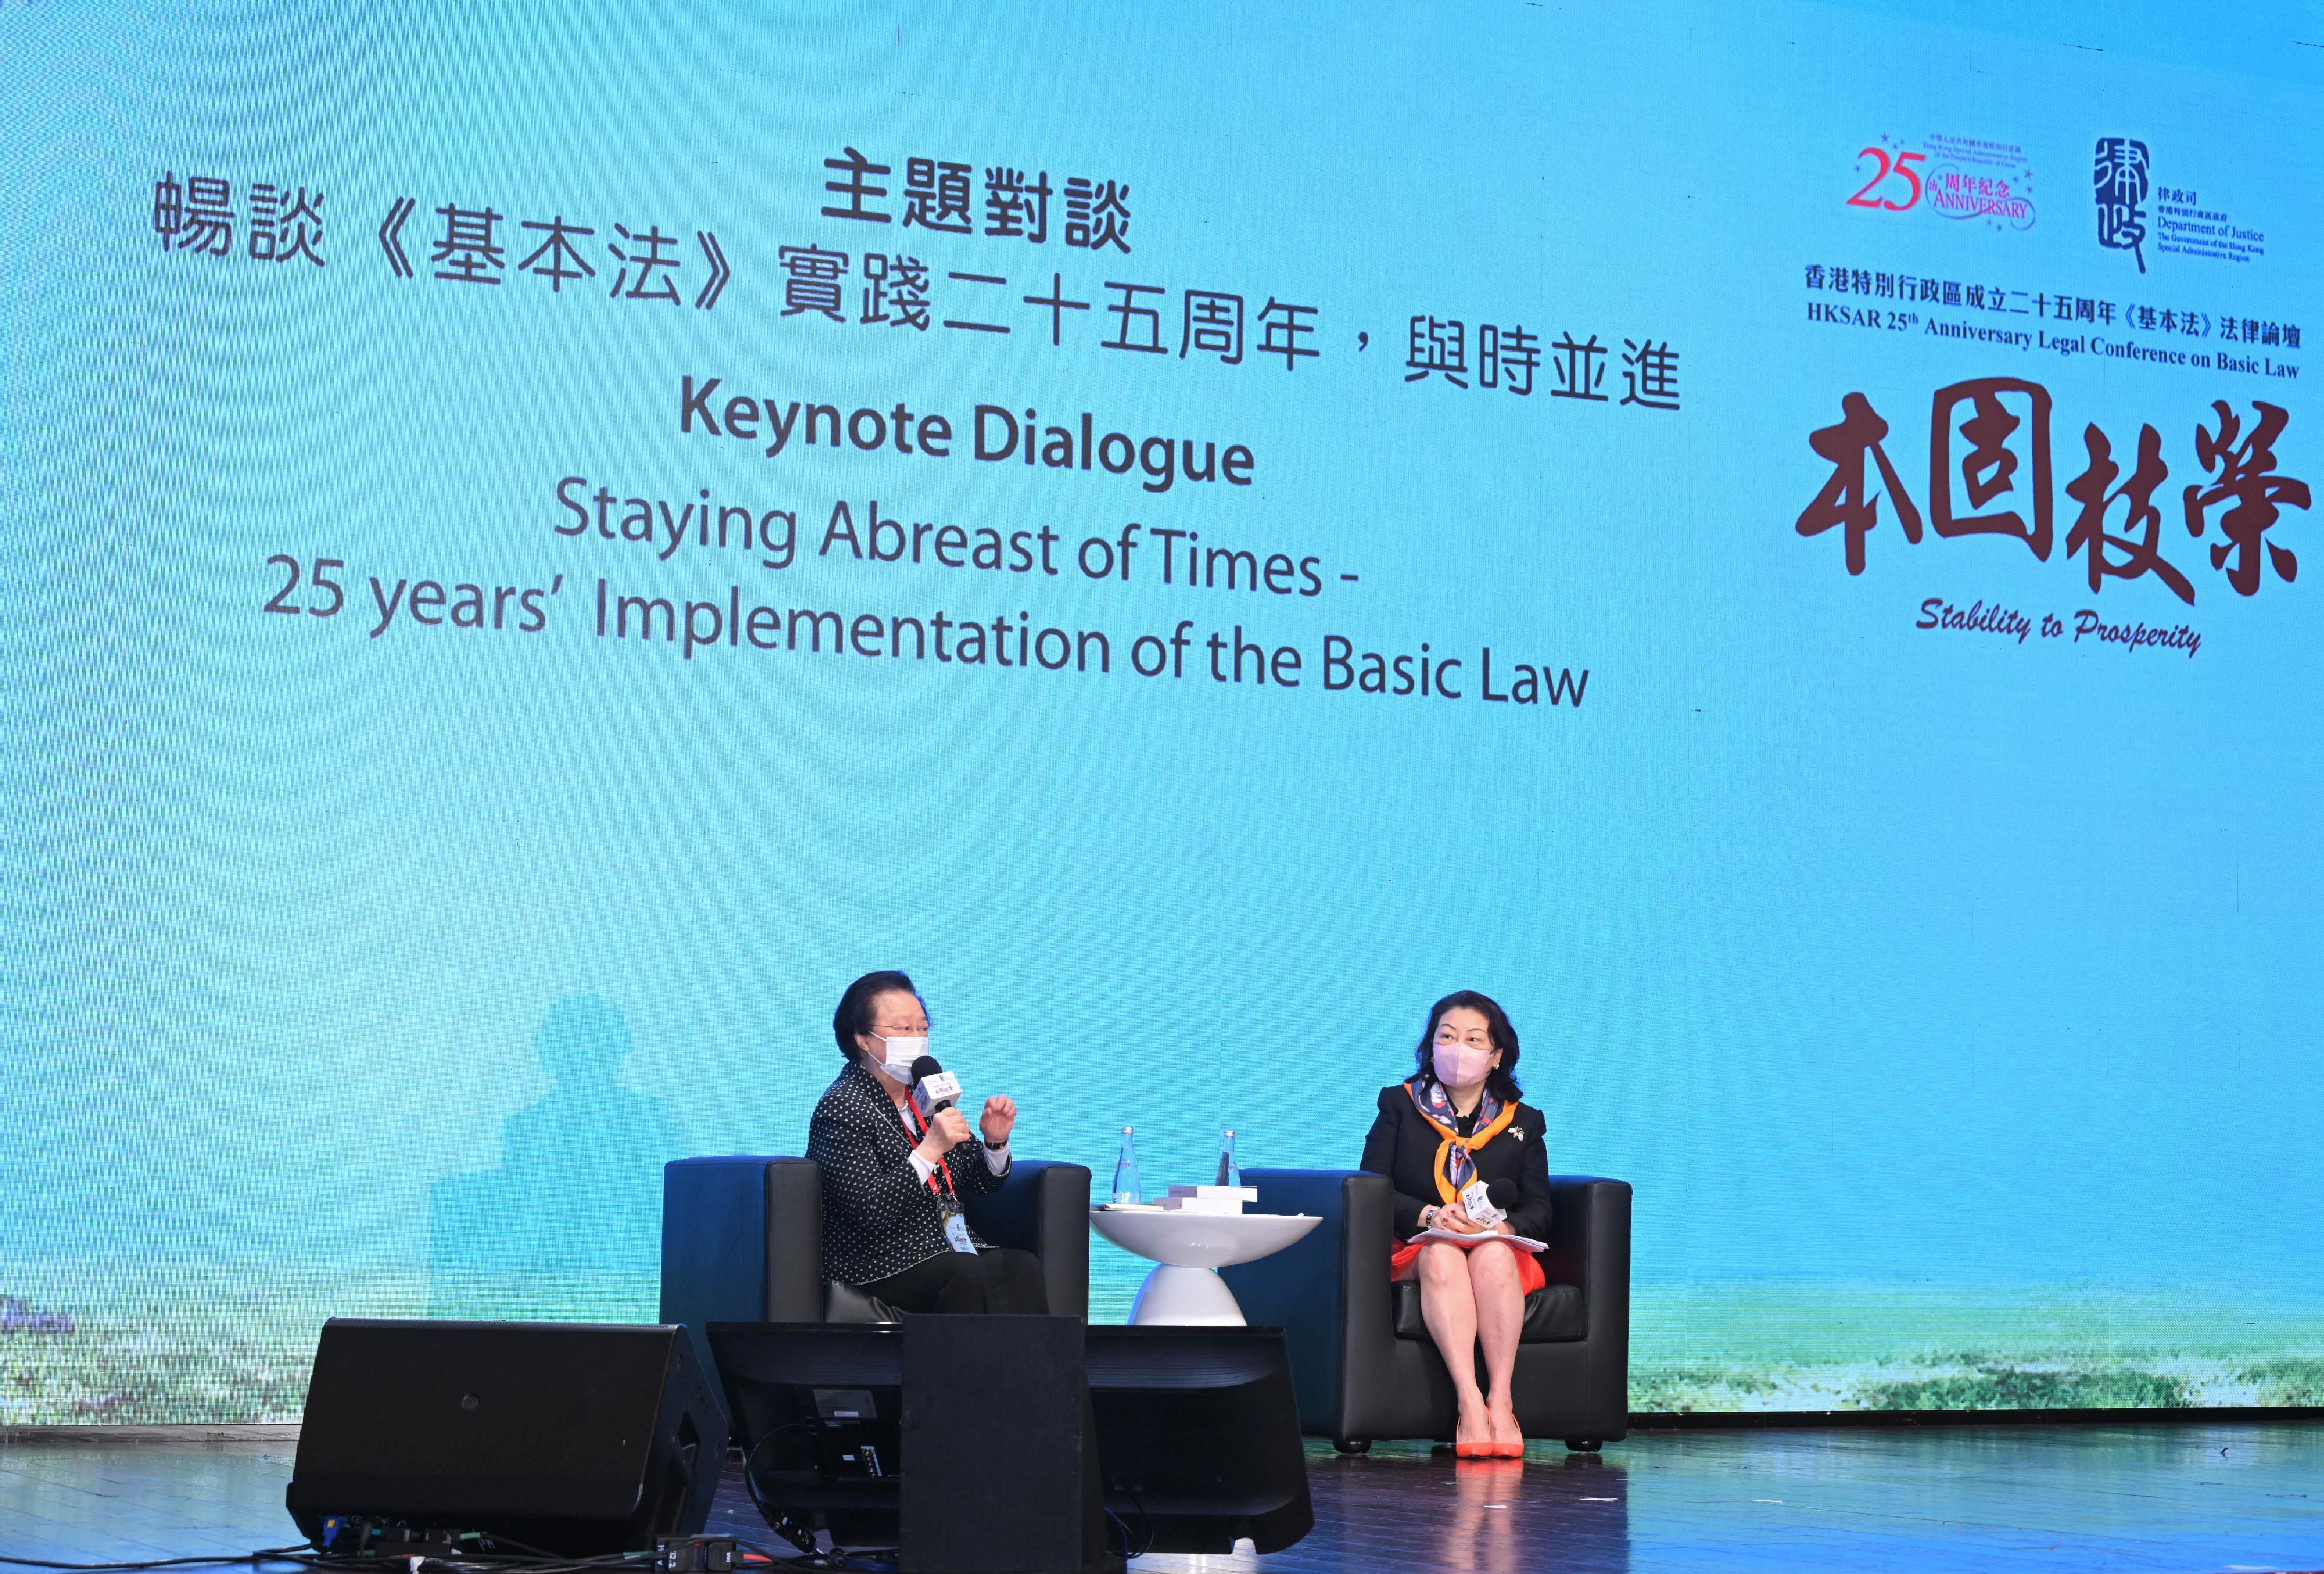 The Hong Kong Special Administrative Region (HKSAR) 25th Anniversary Legal Conference on Basic Law "Stability to Prosperity" was hosted by the Department of Justice today (May 27). Photo shows the Secretary for Justice, Ms Teresa Cheng, SC (right), and the Vice-chairperson of the HKSAR Basic Law Committee of the Standing Committee of the National People's Congress, Ms Maria Tam (left), talking about the 25 years of implementation of the Basic Law at the Keynote Dialogue session.